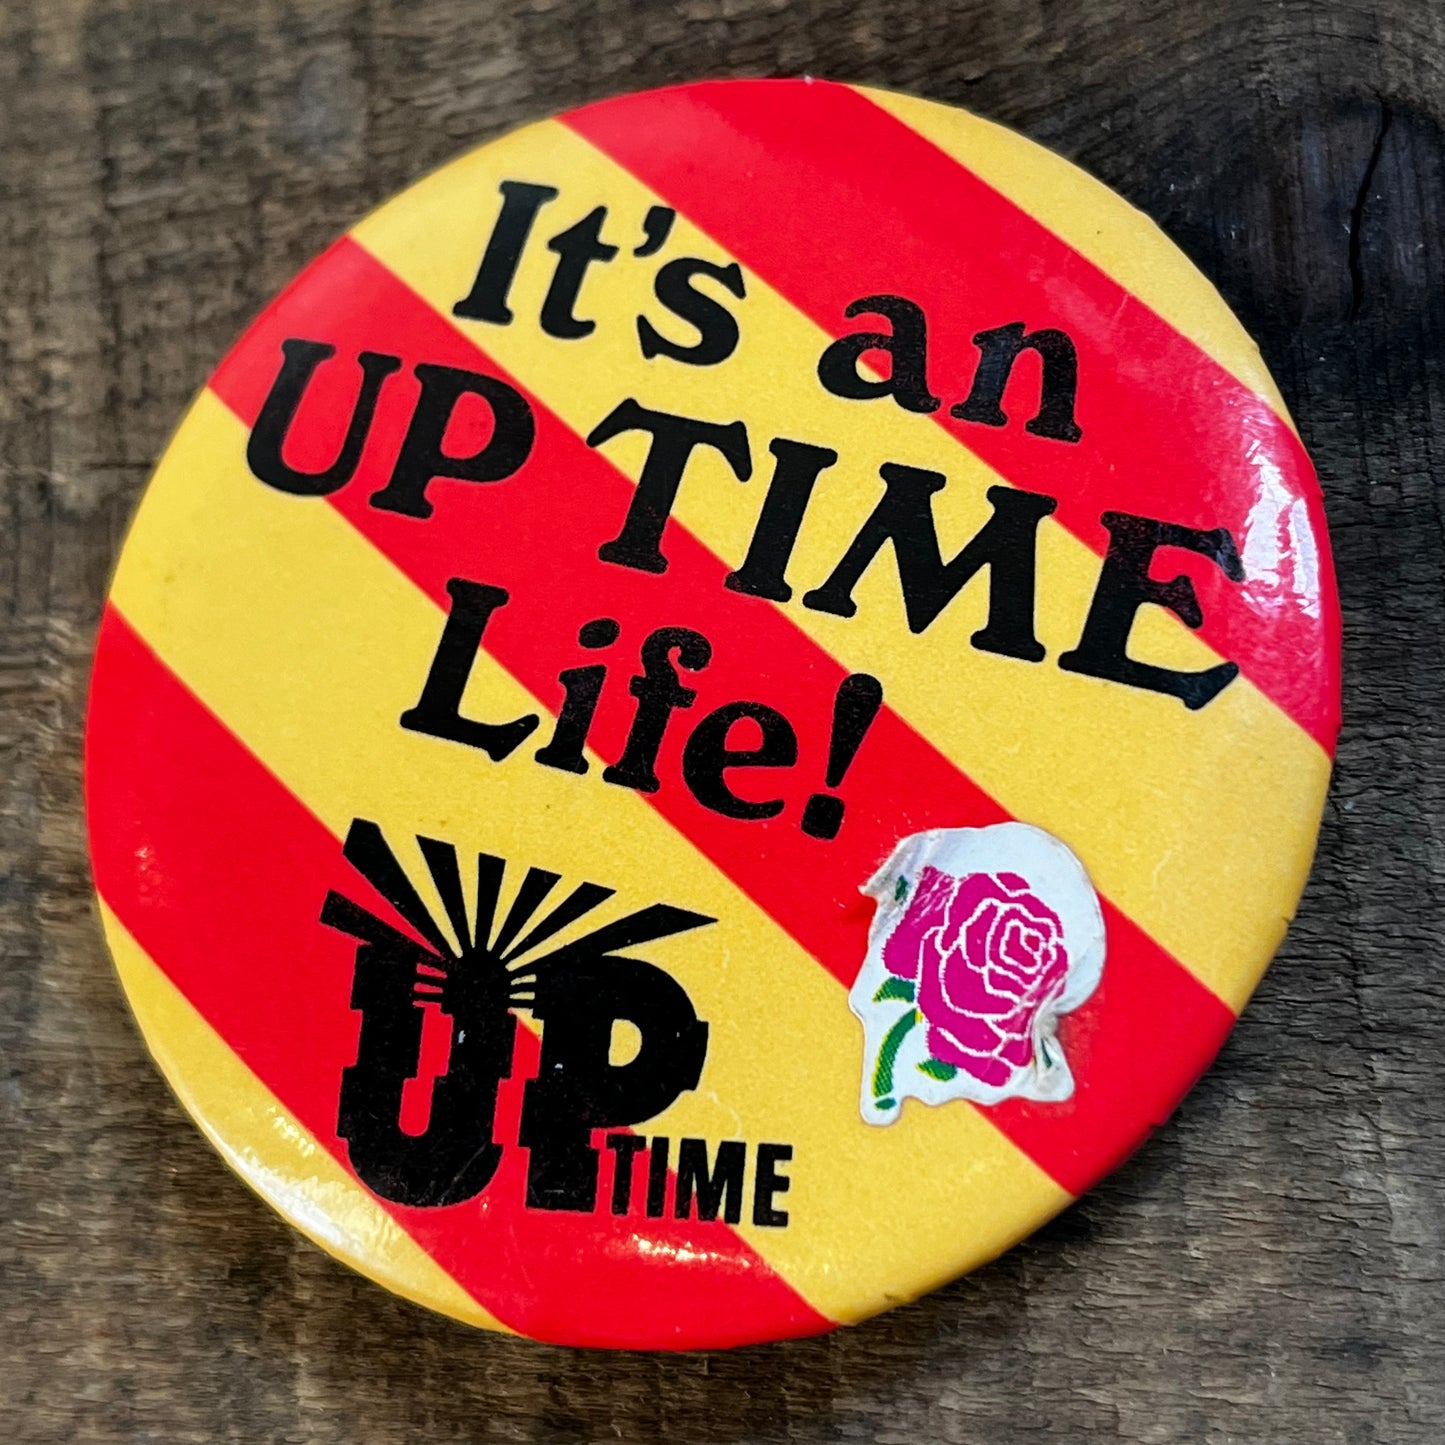 【USA vintage】It’s an UP TIME life！　缶バッジ